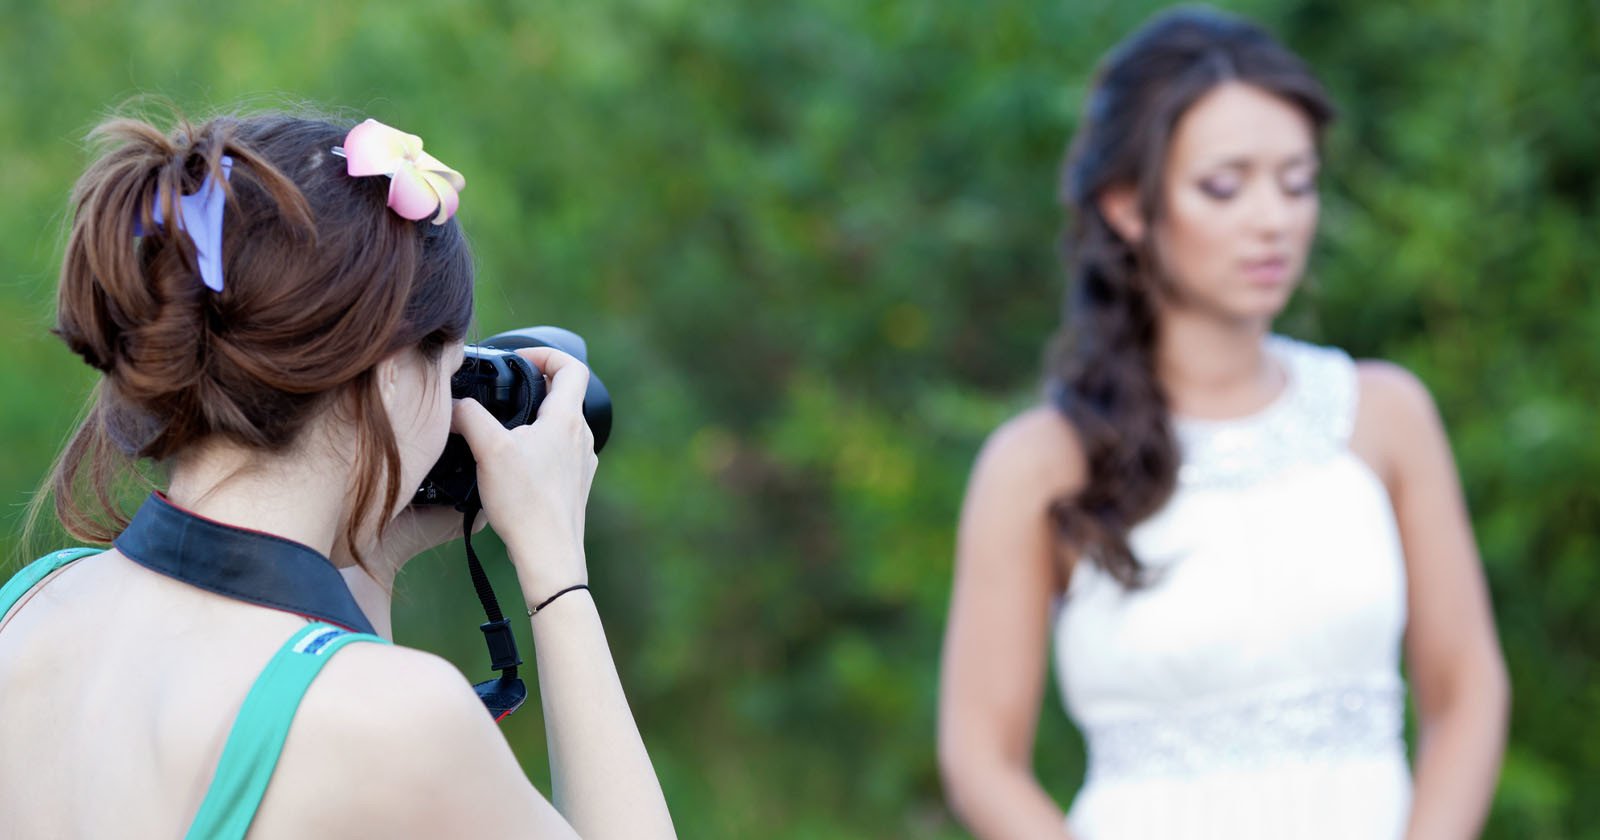 Wedding Photographer Charged with Theft for Withholding Payments